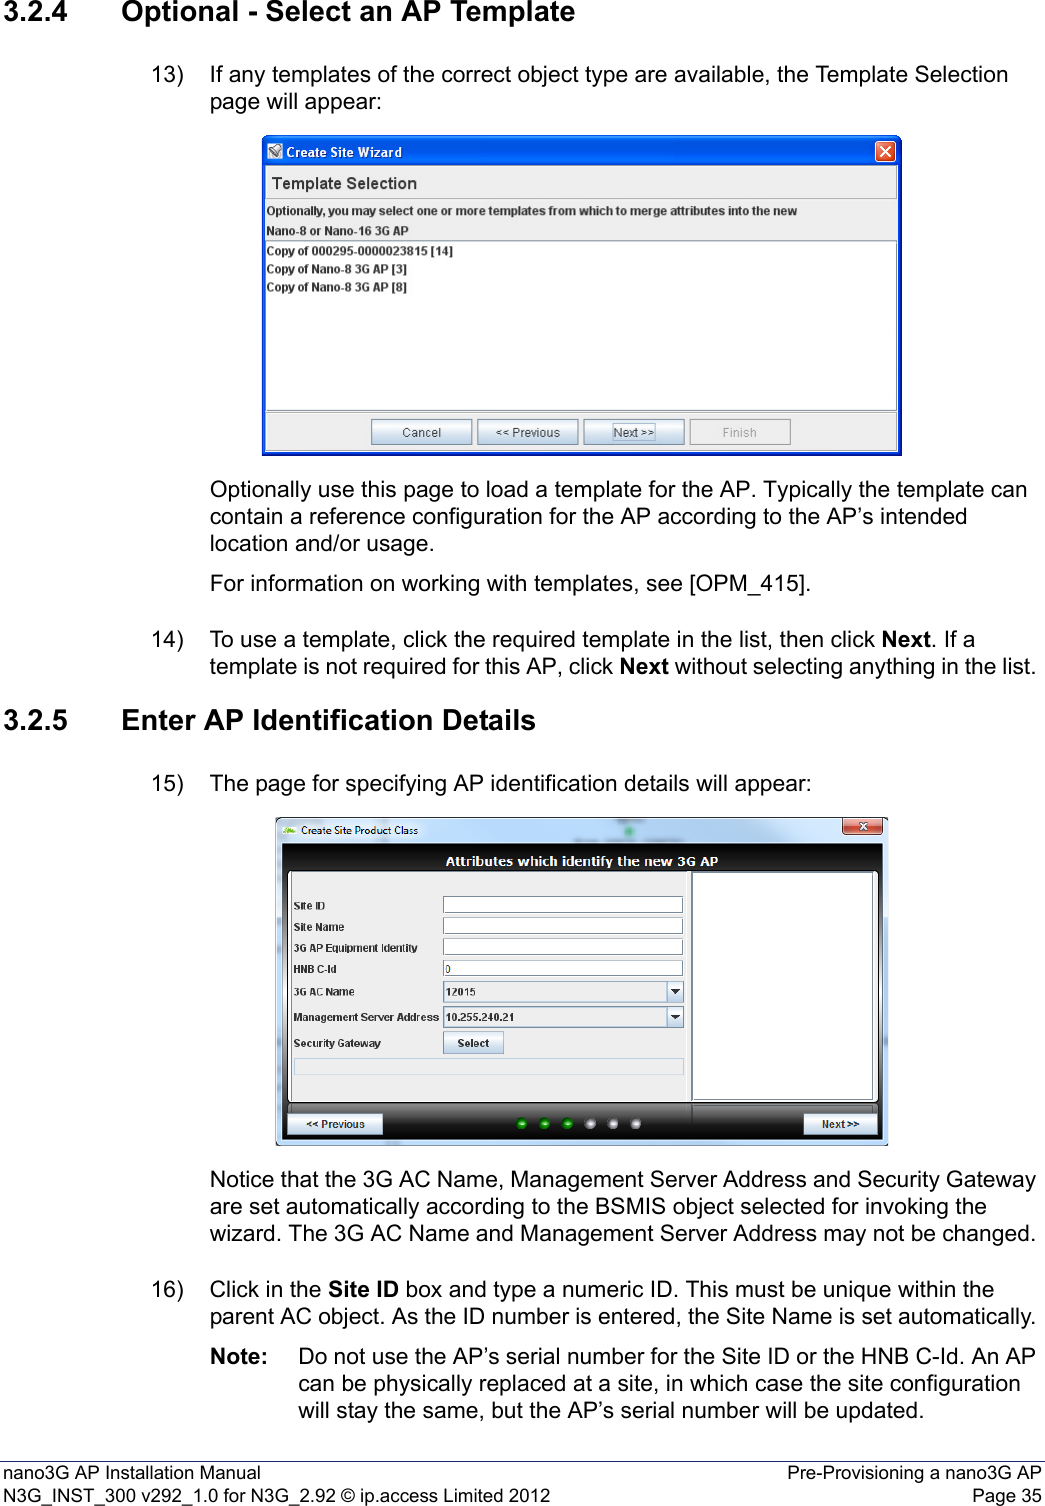 nano3G AP Installation Manual Pre-Provisioning a nano3G APN3G_INST_300 v292_1.0 for N3G_2.92 © ip.access Limited 2012 Page 353.2.4 Optional - Select an AP Template13) If any templates of the correct object type are available, the Template Selection page will appear:Optionally use this page to load a template for the AP. Typically the template can contain a reference configuration for the AP according to the AP’s intended location and/or usage. For information on working with templates, see [OPM_415].14) To use a template, click the required template in the list, then click Next. If a template is not required for this AP, click Next without selecting anything in the list. 3.2.5 Enter AP Identification Details15) The page for specifying AP identification details will appear:Notice that the 3G AC Name, Management Server Address and Security Gateway are set automatically according to the BSMIS object selected for invoking the wizard. The 3G AC Name and Management Server Address may not be changed. 16) Click in the Site ID box and type a numeric ID. This must be unique within the parent AC object. As the ID number is entered, the Site Name is set automatically. Note: Do not use the AP’s serial number for the Site ID or the HNB C-Id. An AP can be physically replaced at a site, in which case the site configuration will stay the same, but the AP’s serial number will be updated.